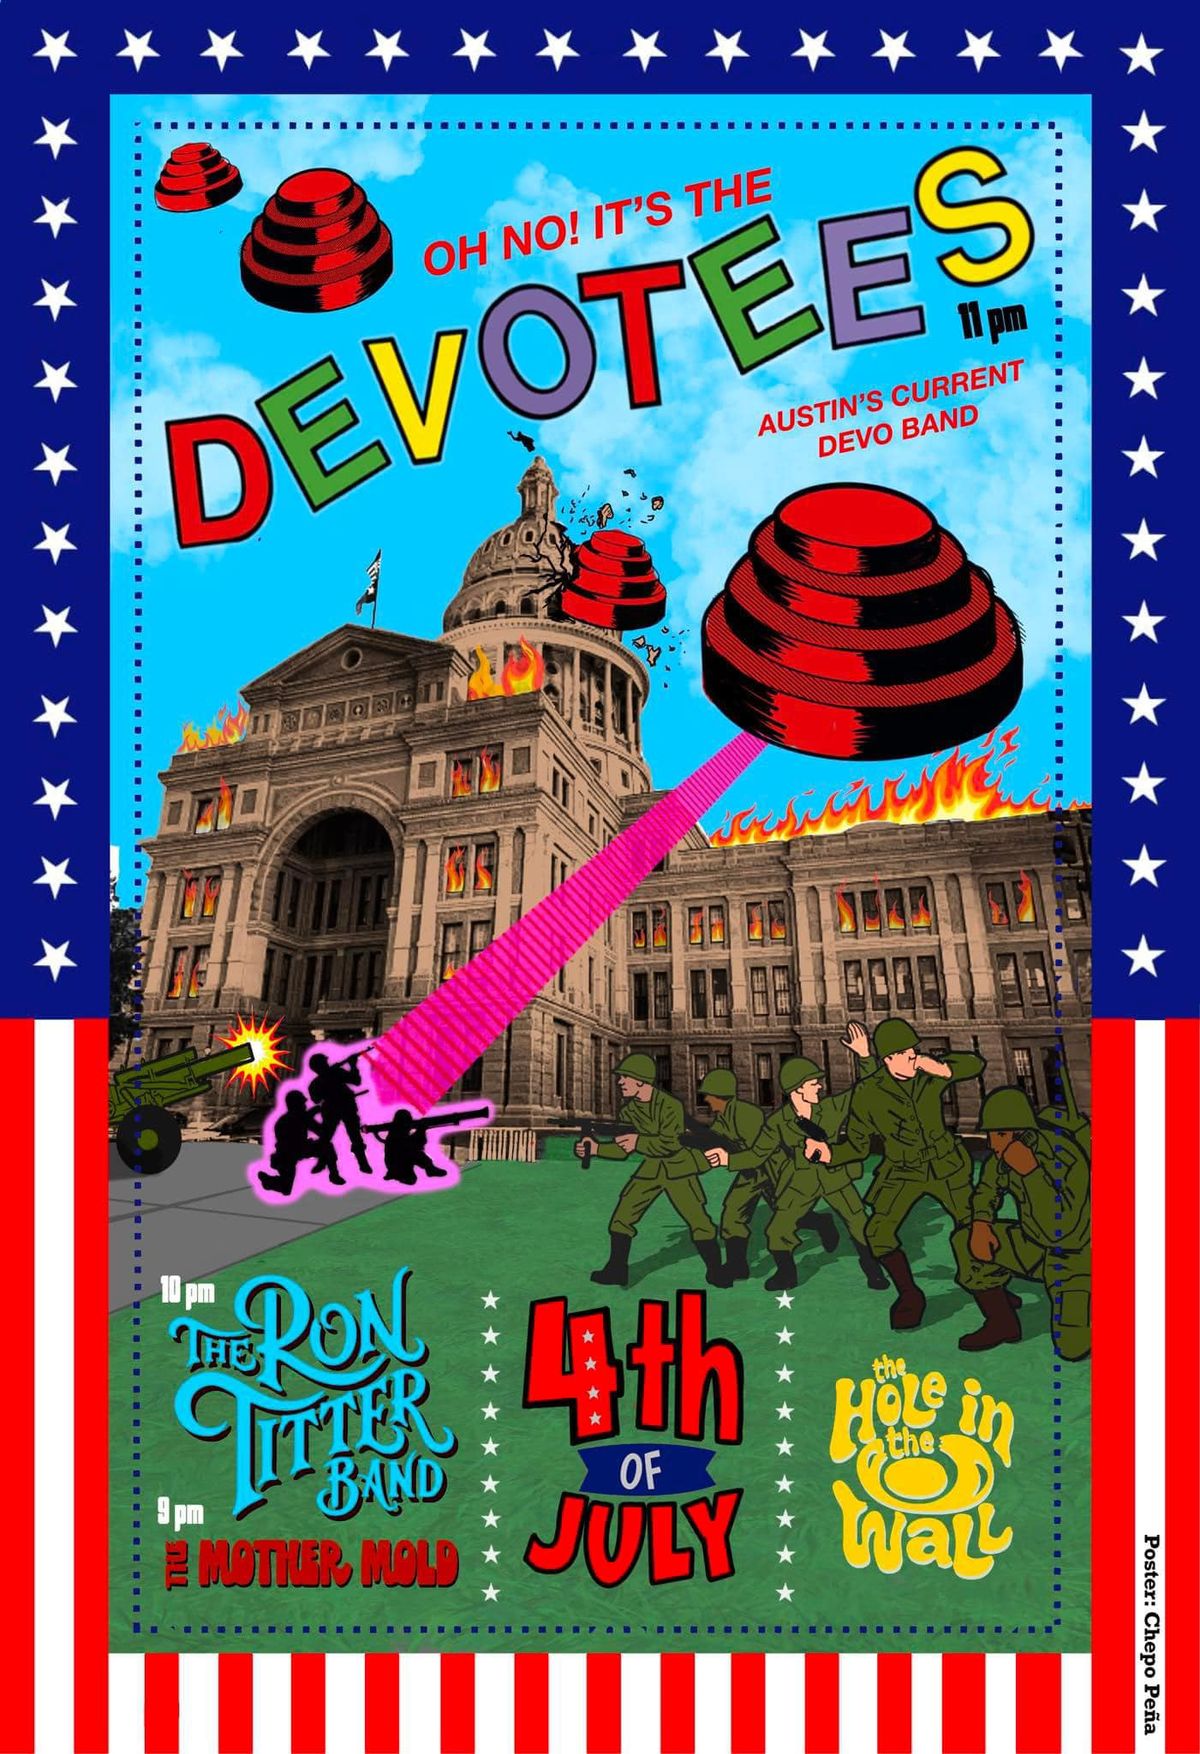 July 4: Devotees, Ron Titter Band, Mothermold @ the Hole